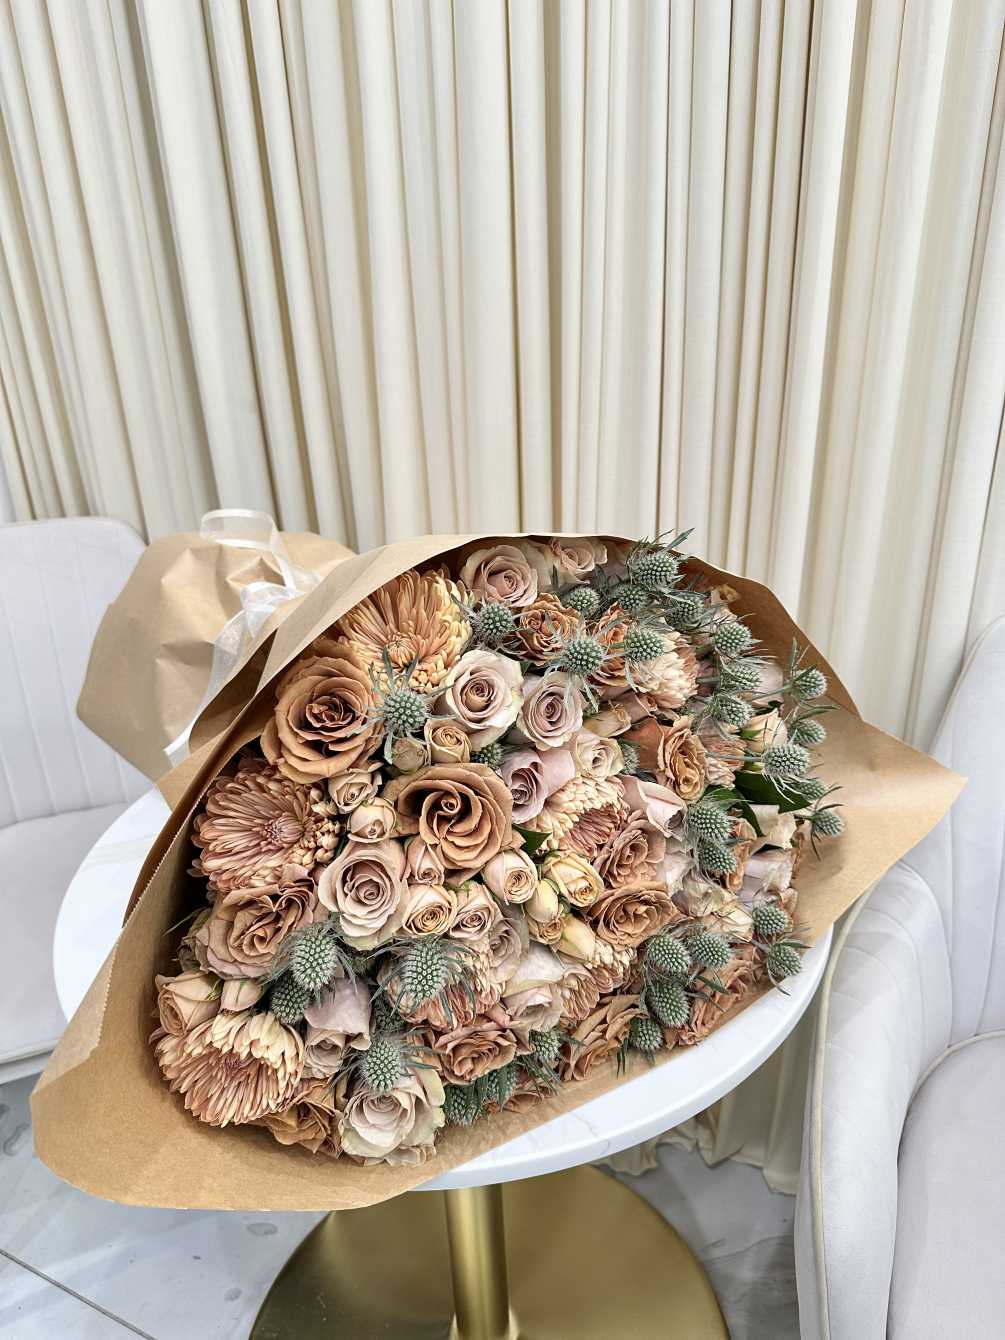 This beautiful bouquet features a mix of seasonal blooms in soft, muted